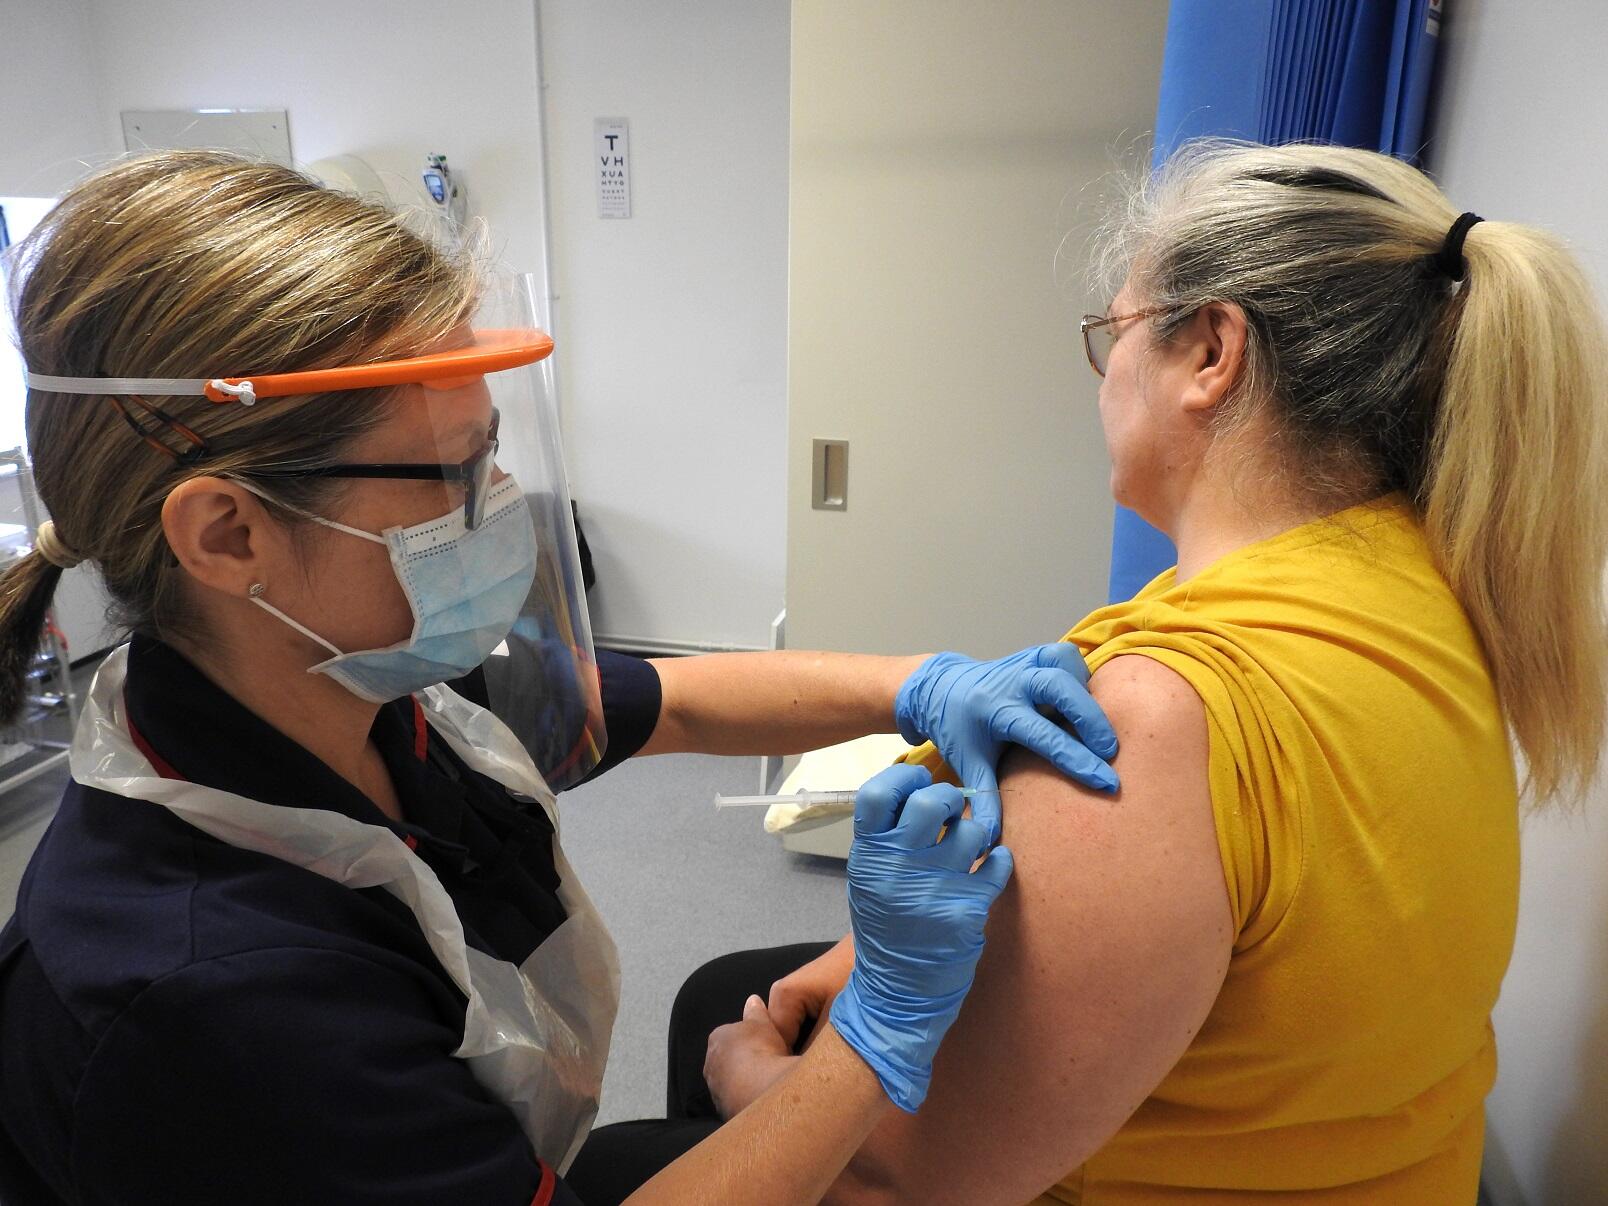 WTC staff member vaccinates a volunteer as part of the Oxford COVID-19 vaccine trial